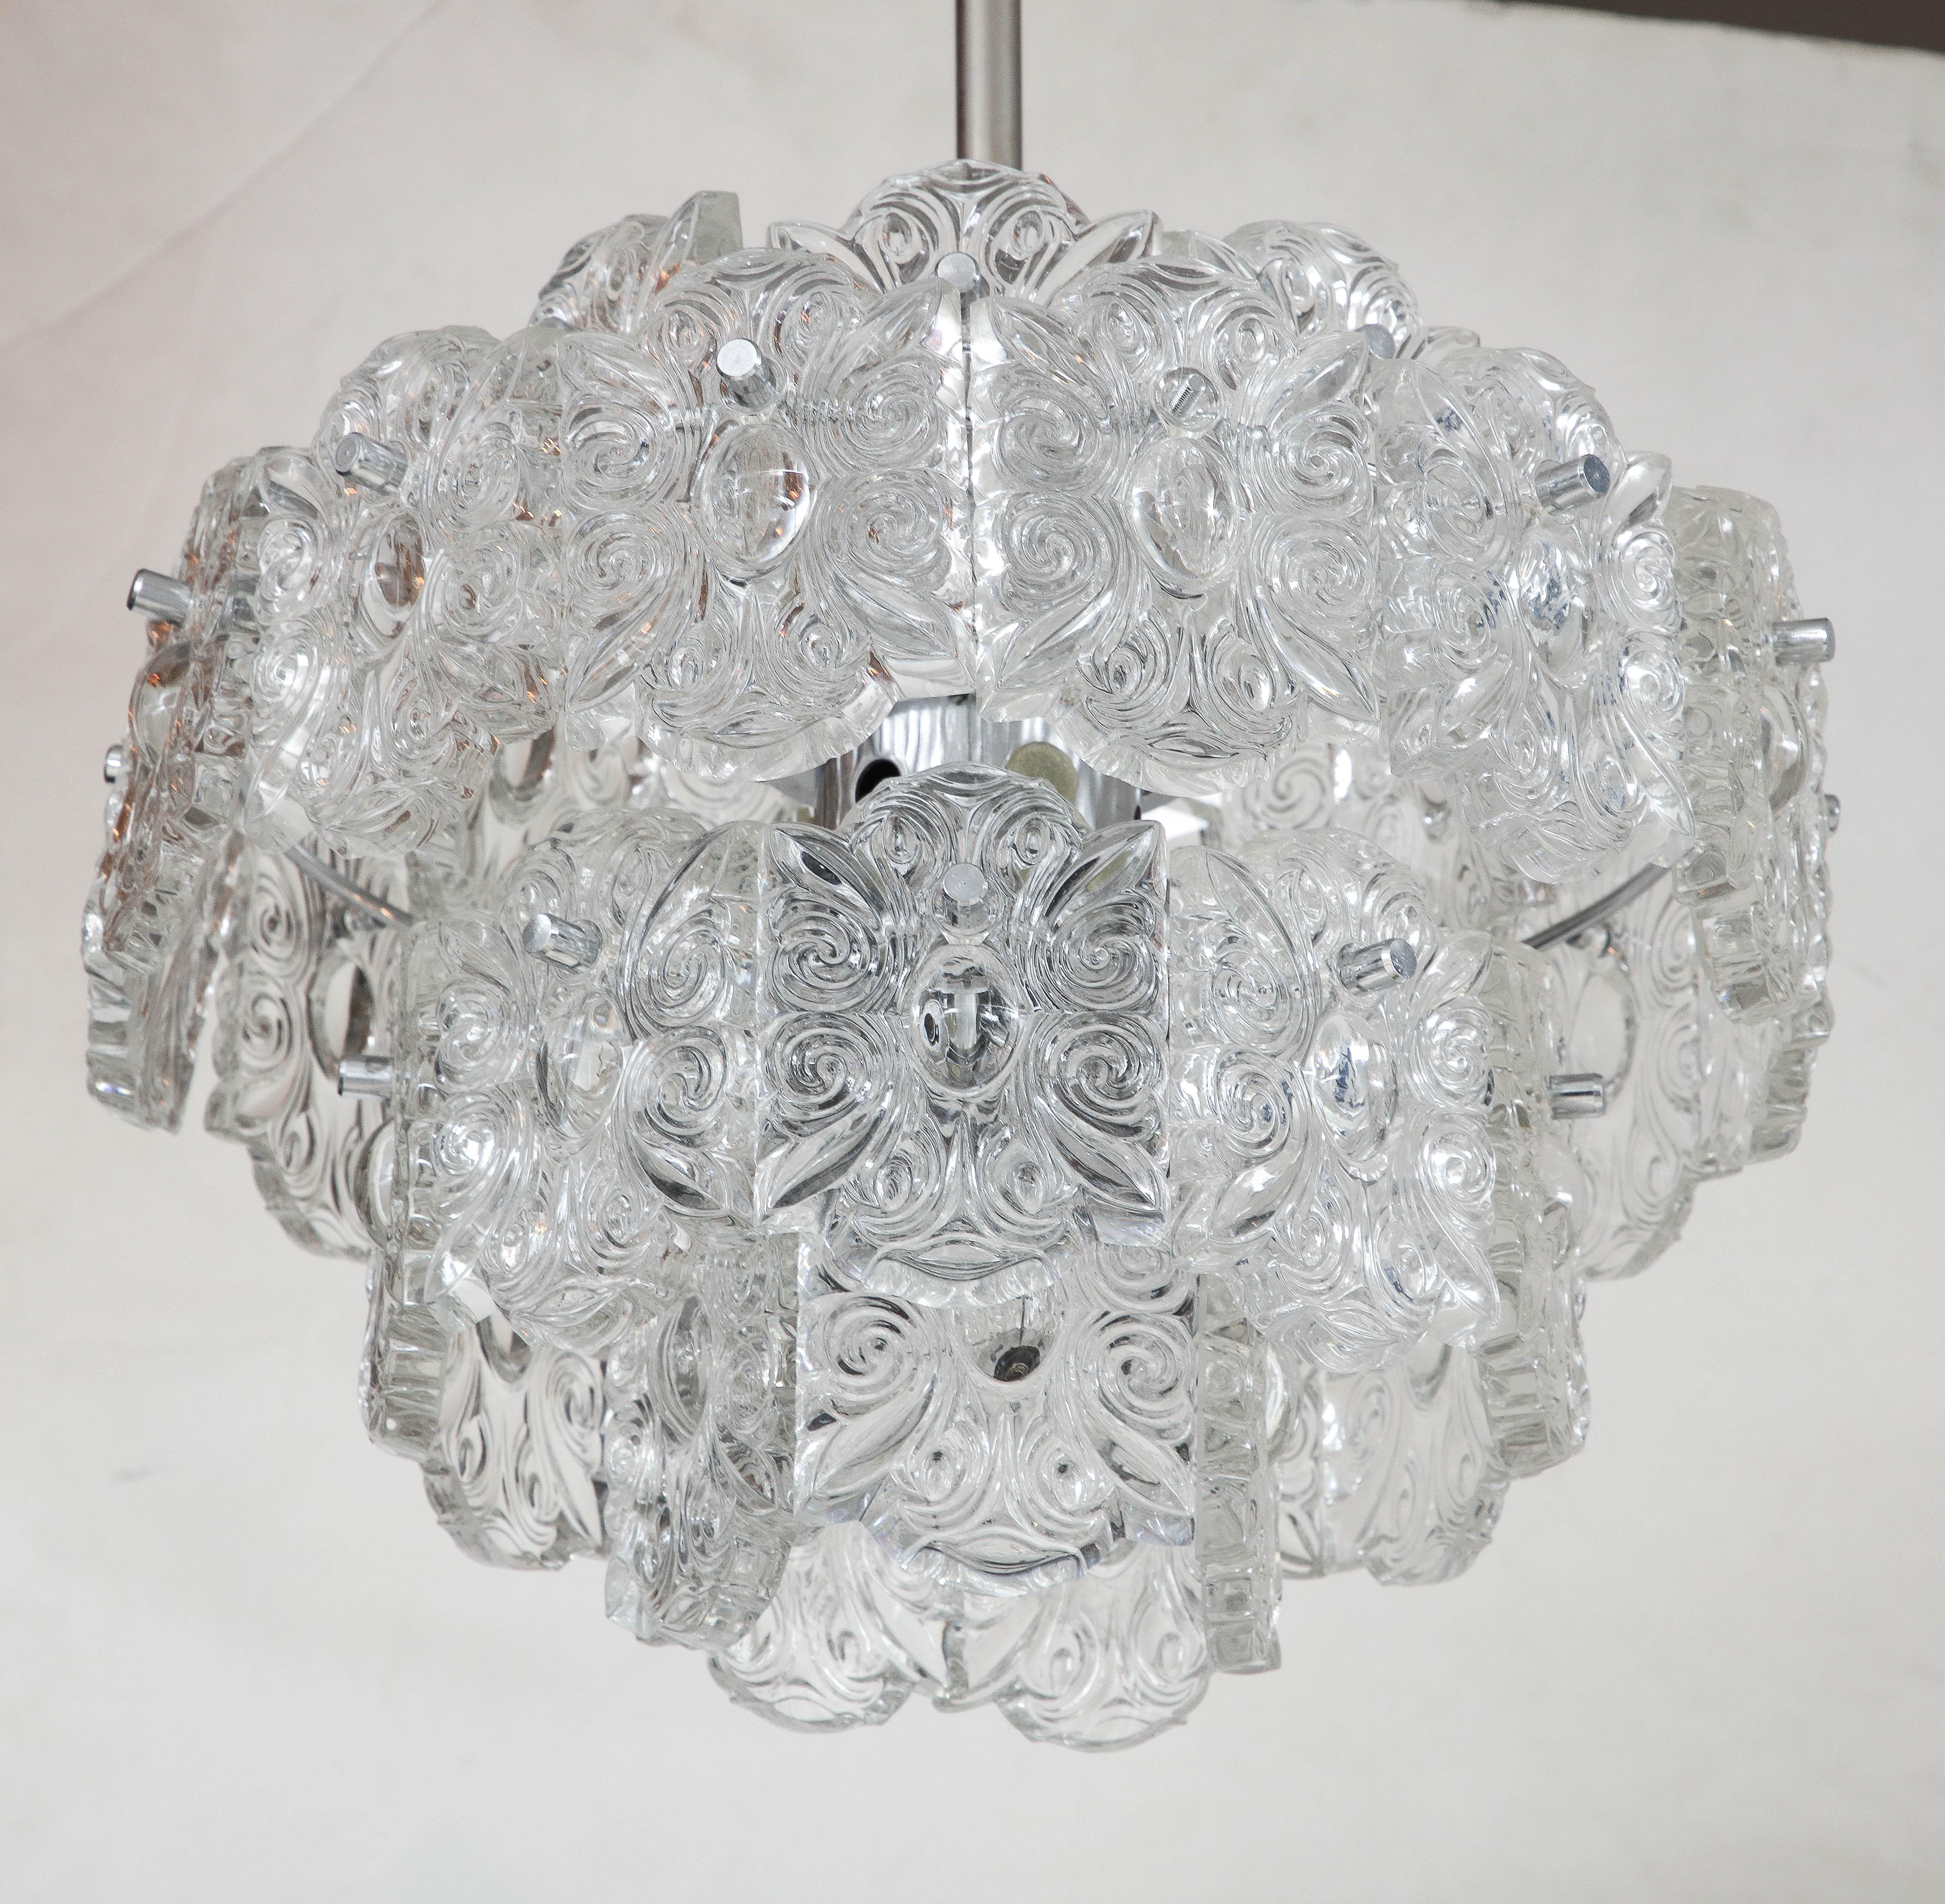 Kinkeldey, Austrian Cameo Crystal Chandelier In Excellent Condition For Sale In New York, NY